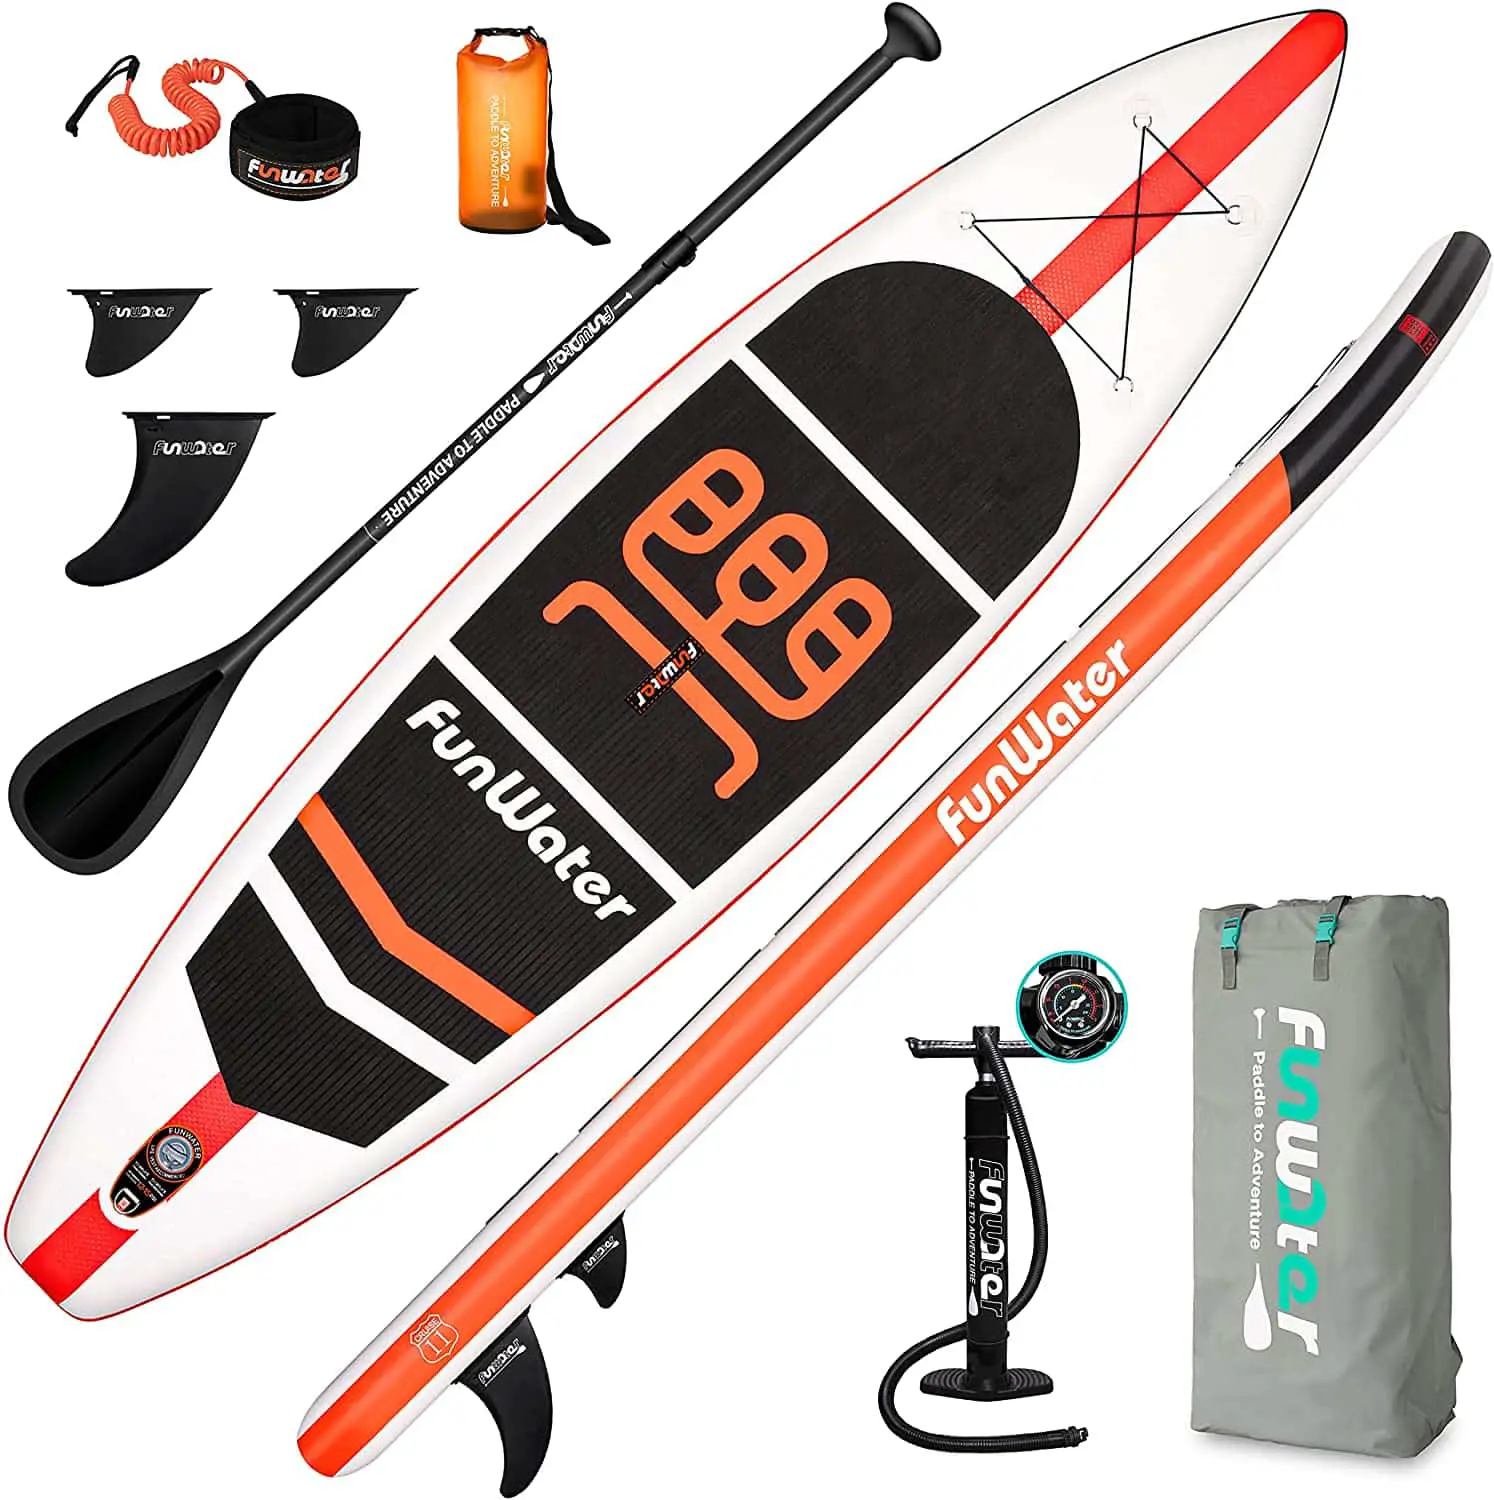 Stand Up Paddle Complete Set by Funwater containing SUP Board, Paddle, Pump, Fins, Leash, Drybag and Carrybag